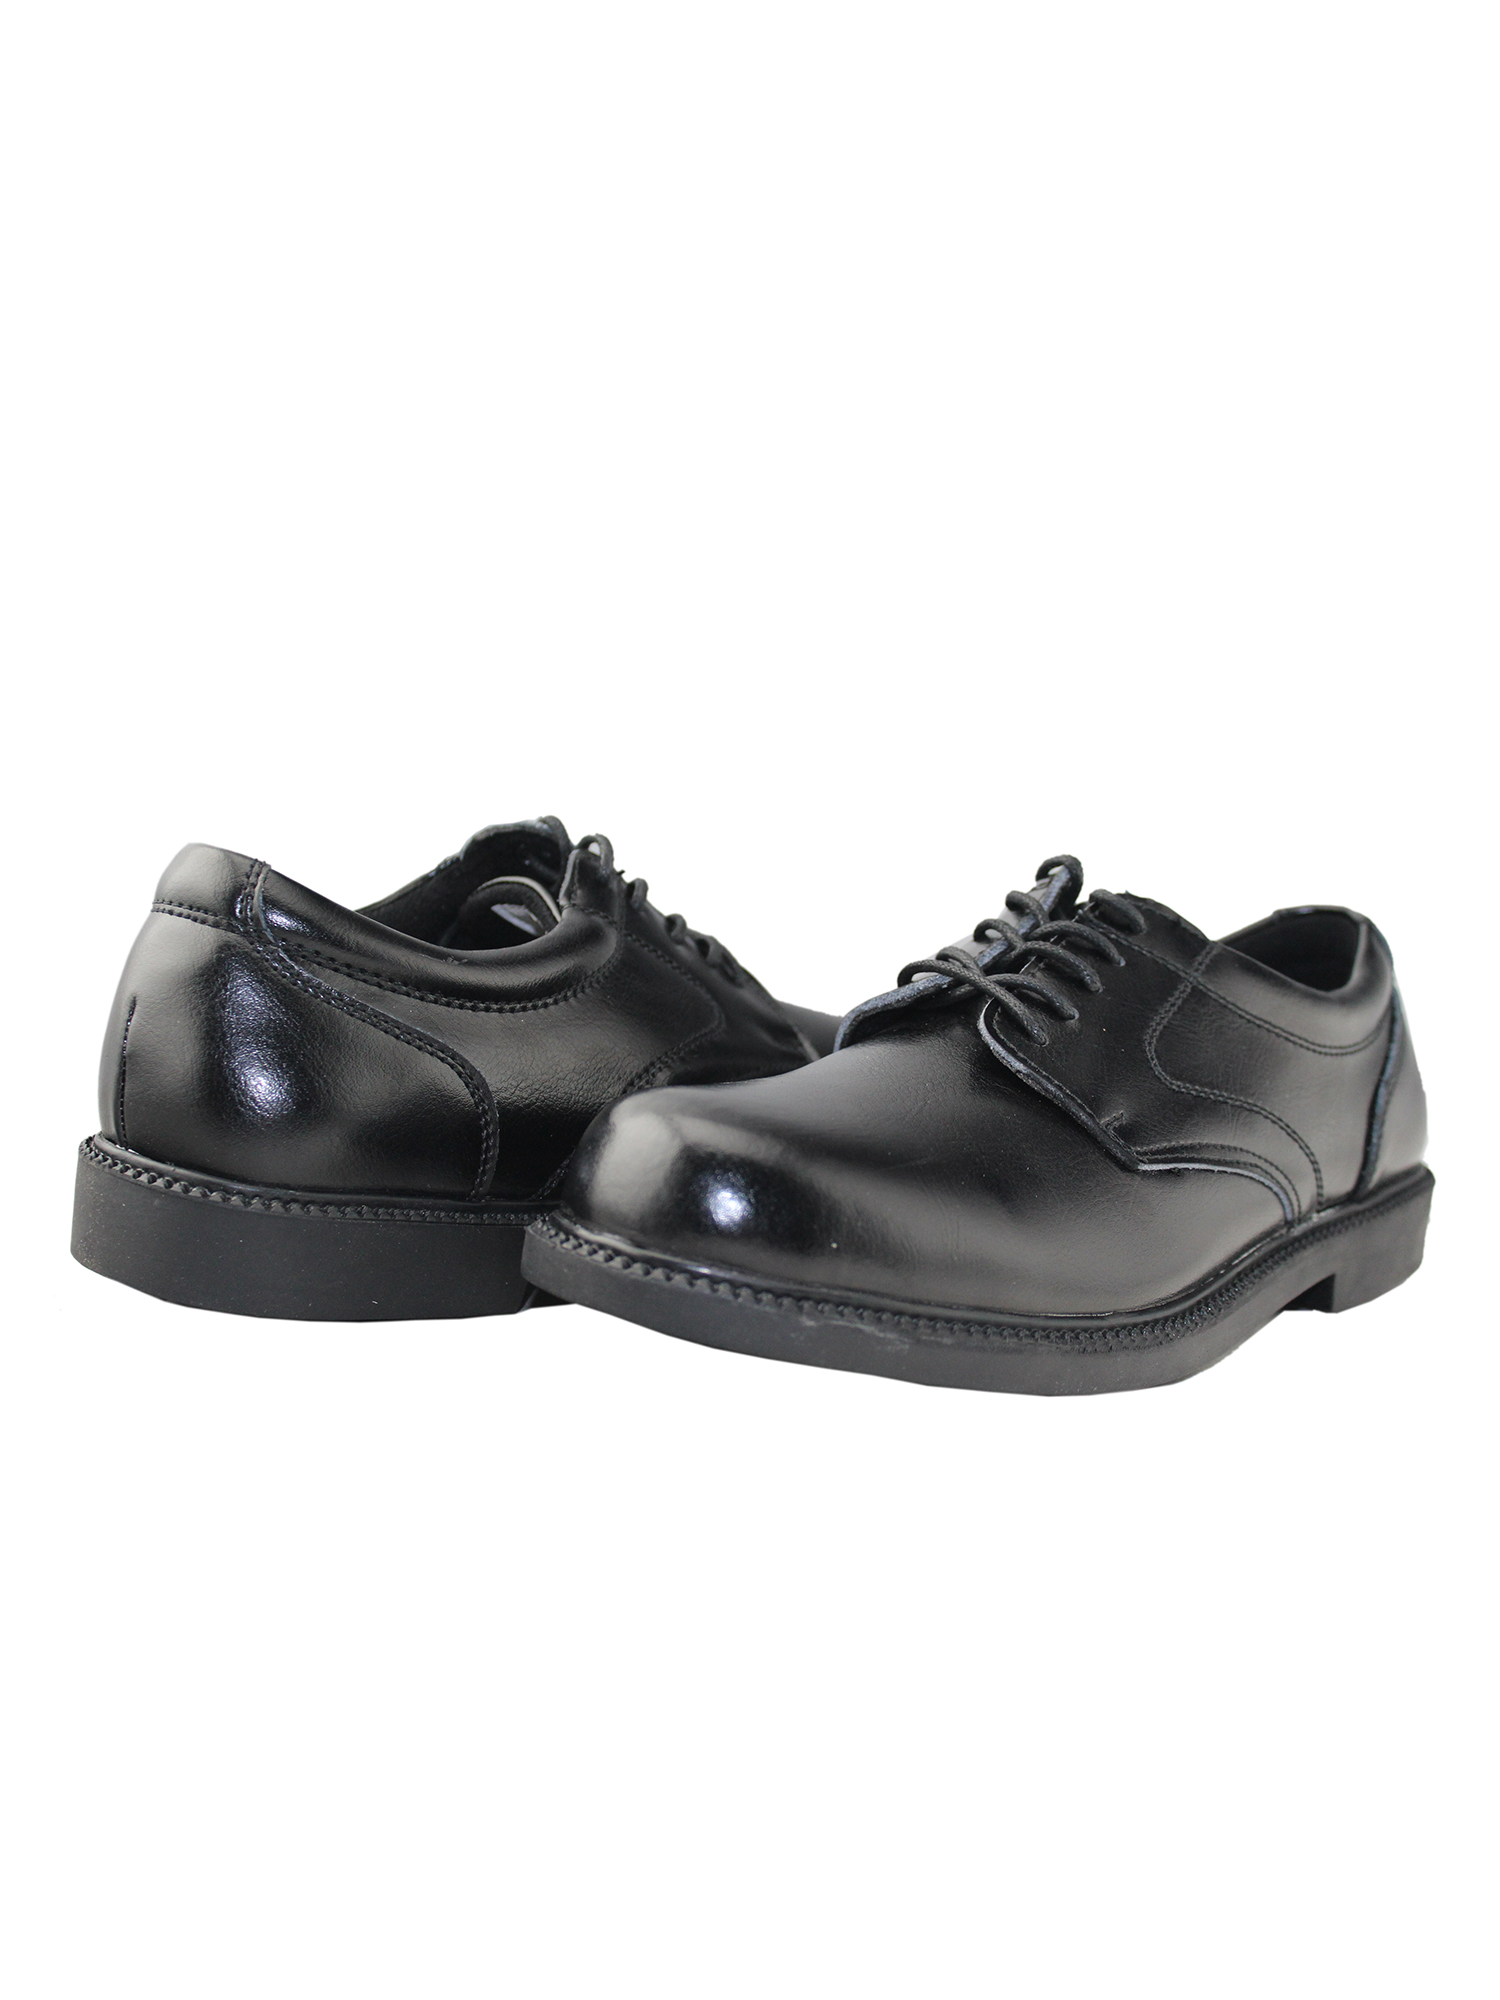 Mens Oxford Leather Shoes Comfortable Black Lace Up Slip and Oil Resistant Shoes - image 3 of 5